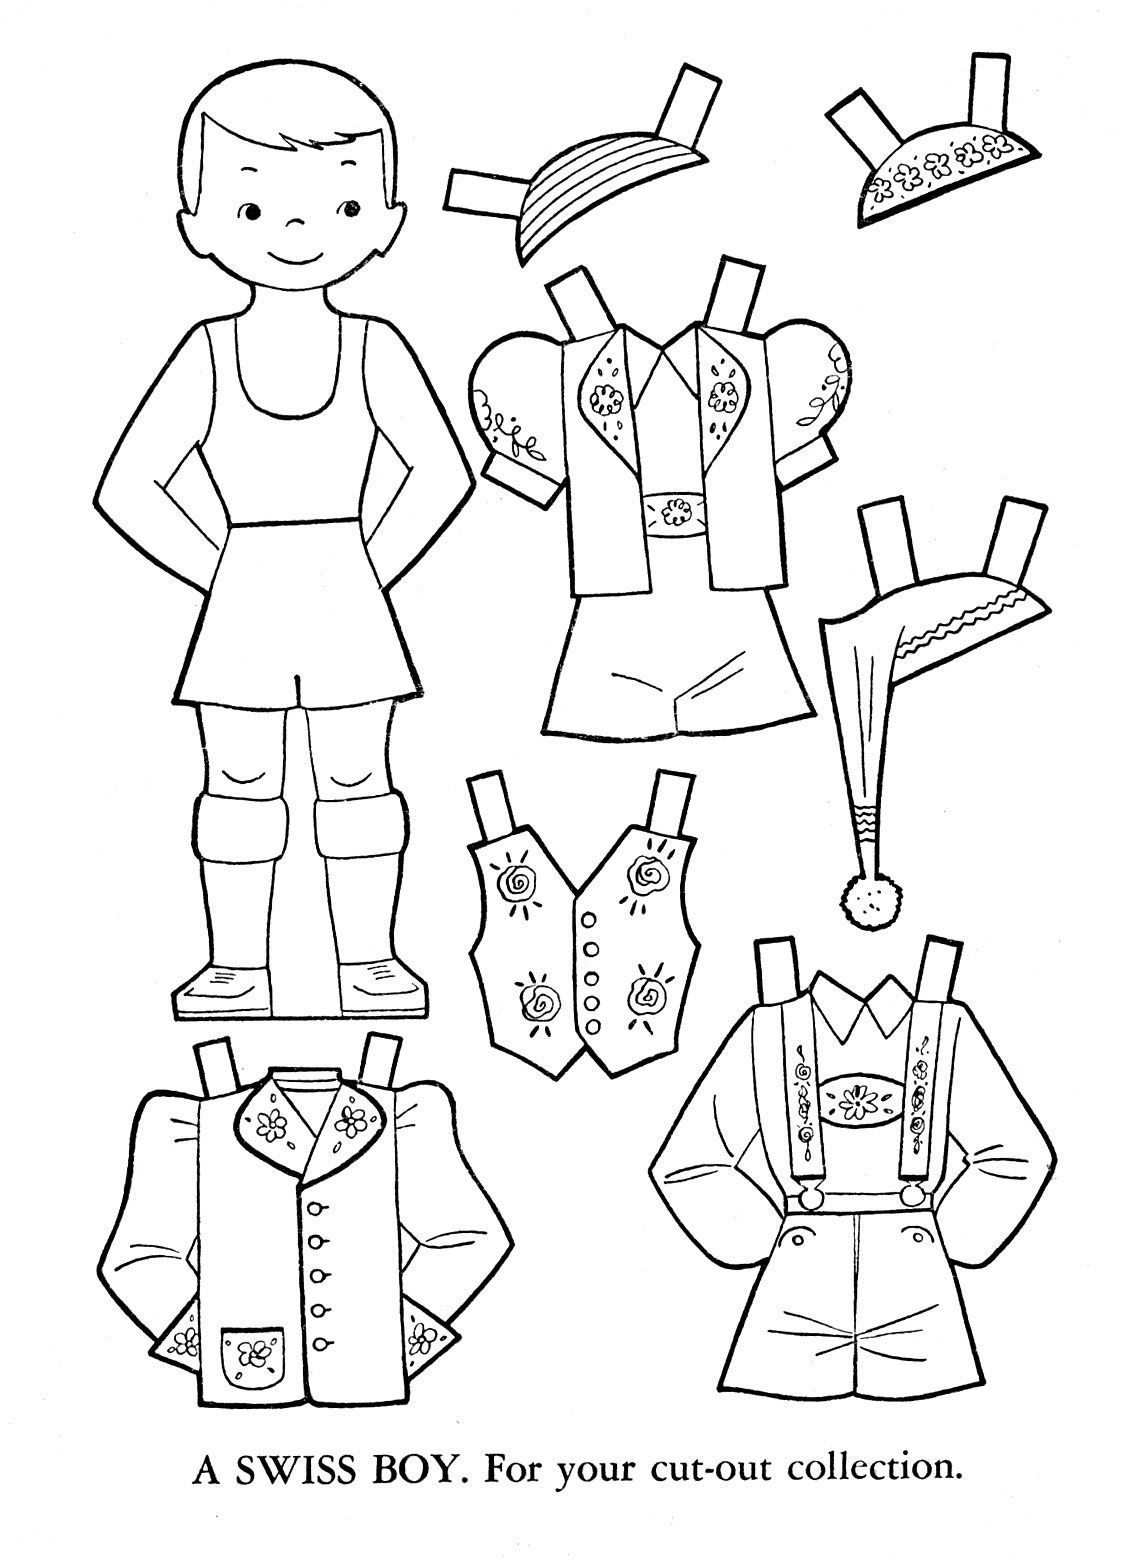 paper-dolls-around-the-world-printables-get-what-you-need-for-free